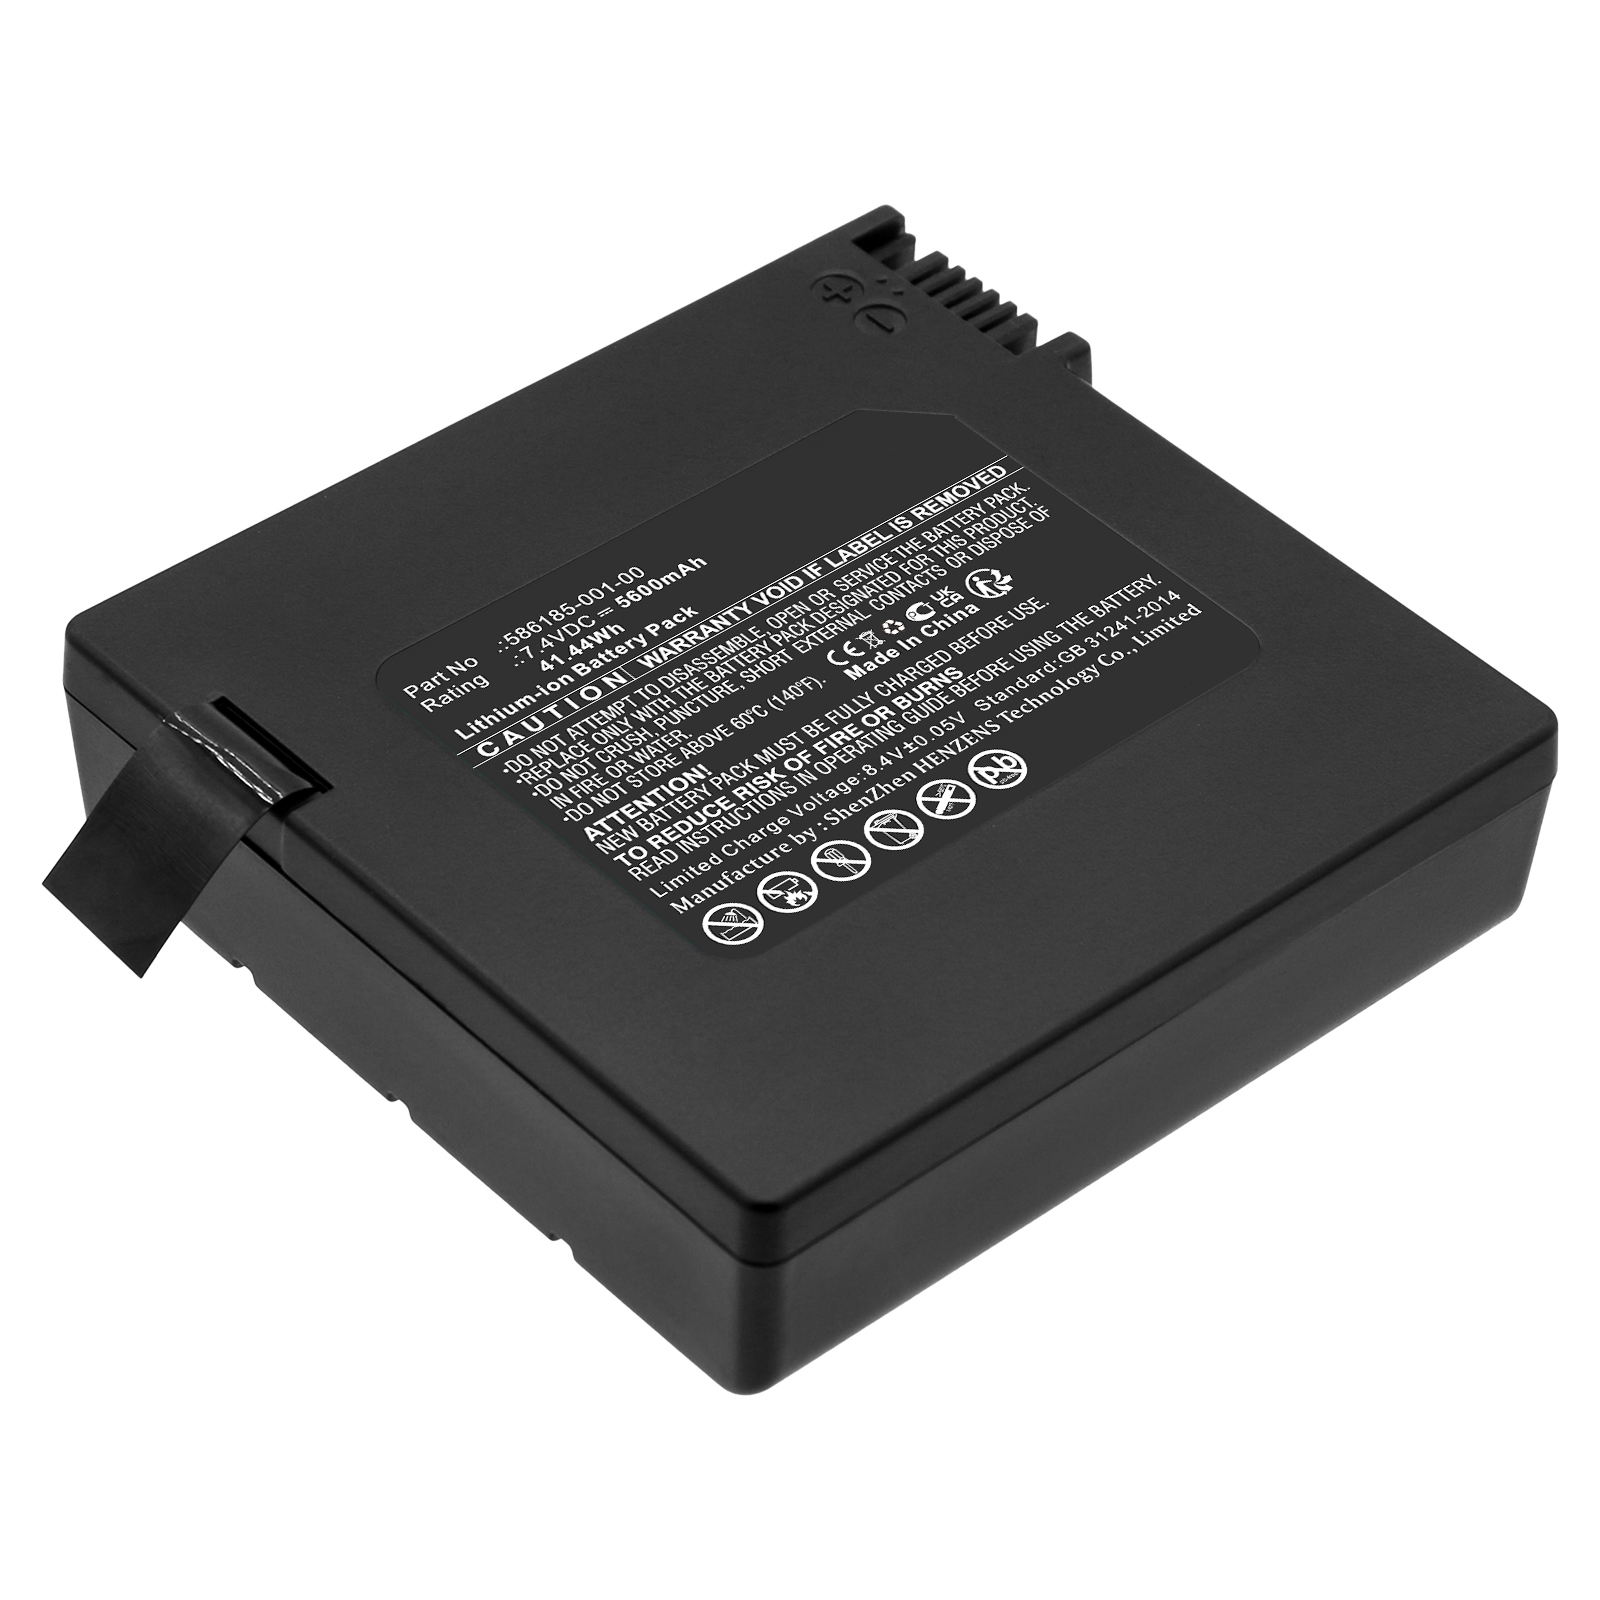 Synergy Digital Cable Modem Battery, Compatible with ARRIS 586185-001-00 Cable Modem Battery (Li-ion, 7.4V, 5600mAh)